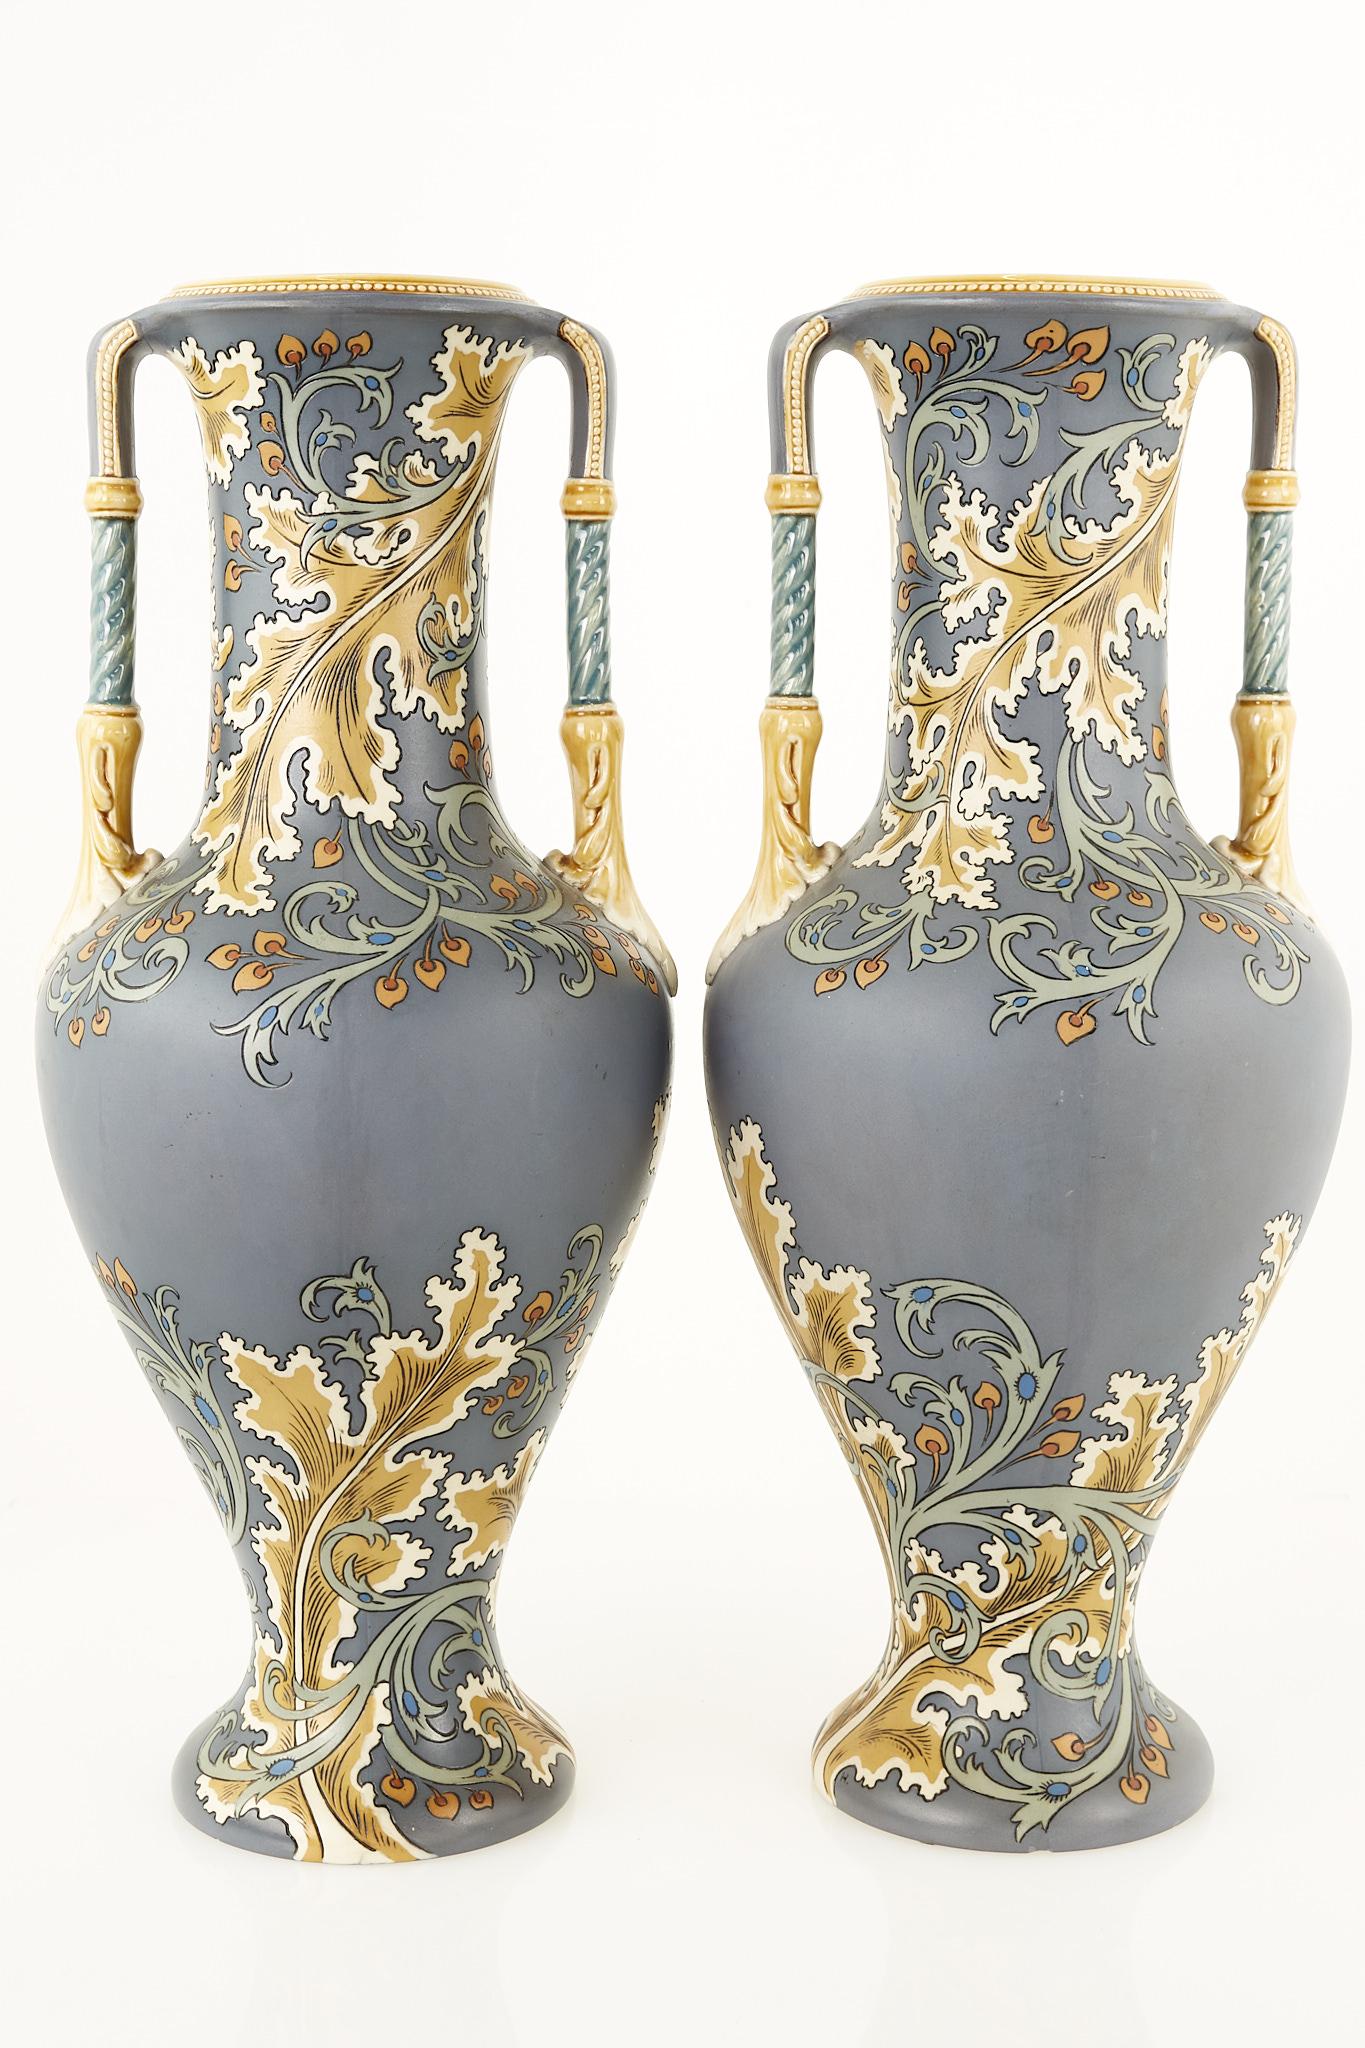 20th Century Floral Art Nouveau Vase by Mettlach, Later Villeroy & Boch, a Pair For Sale